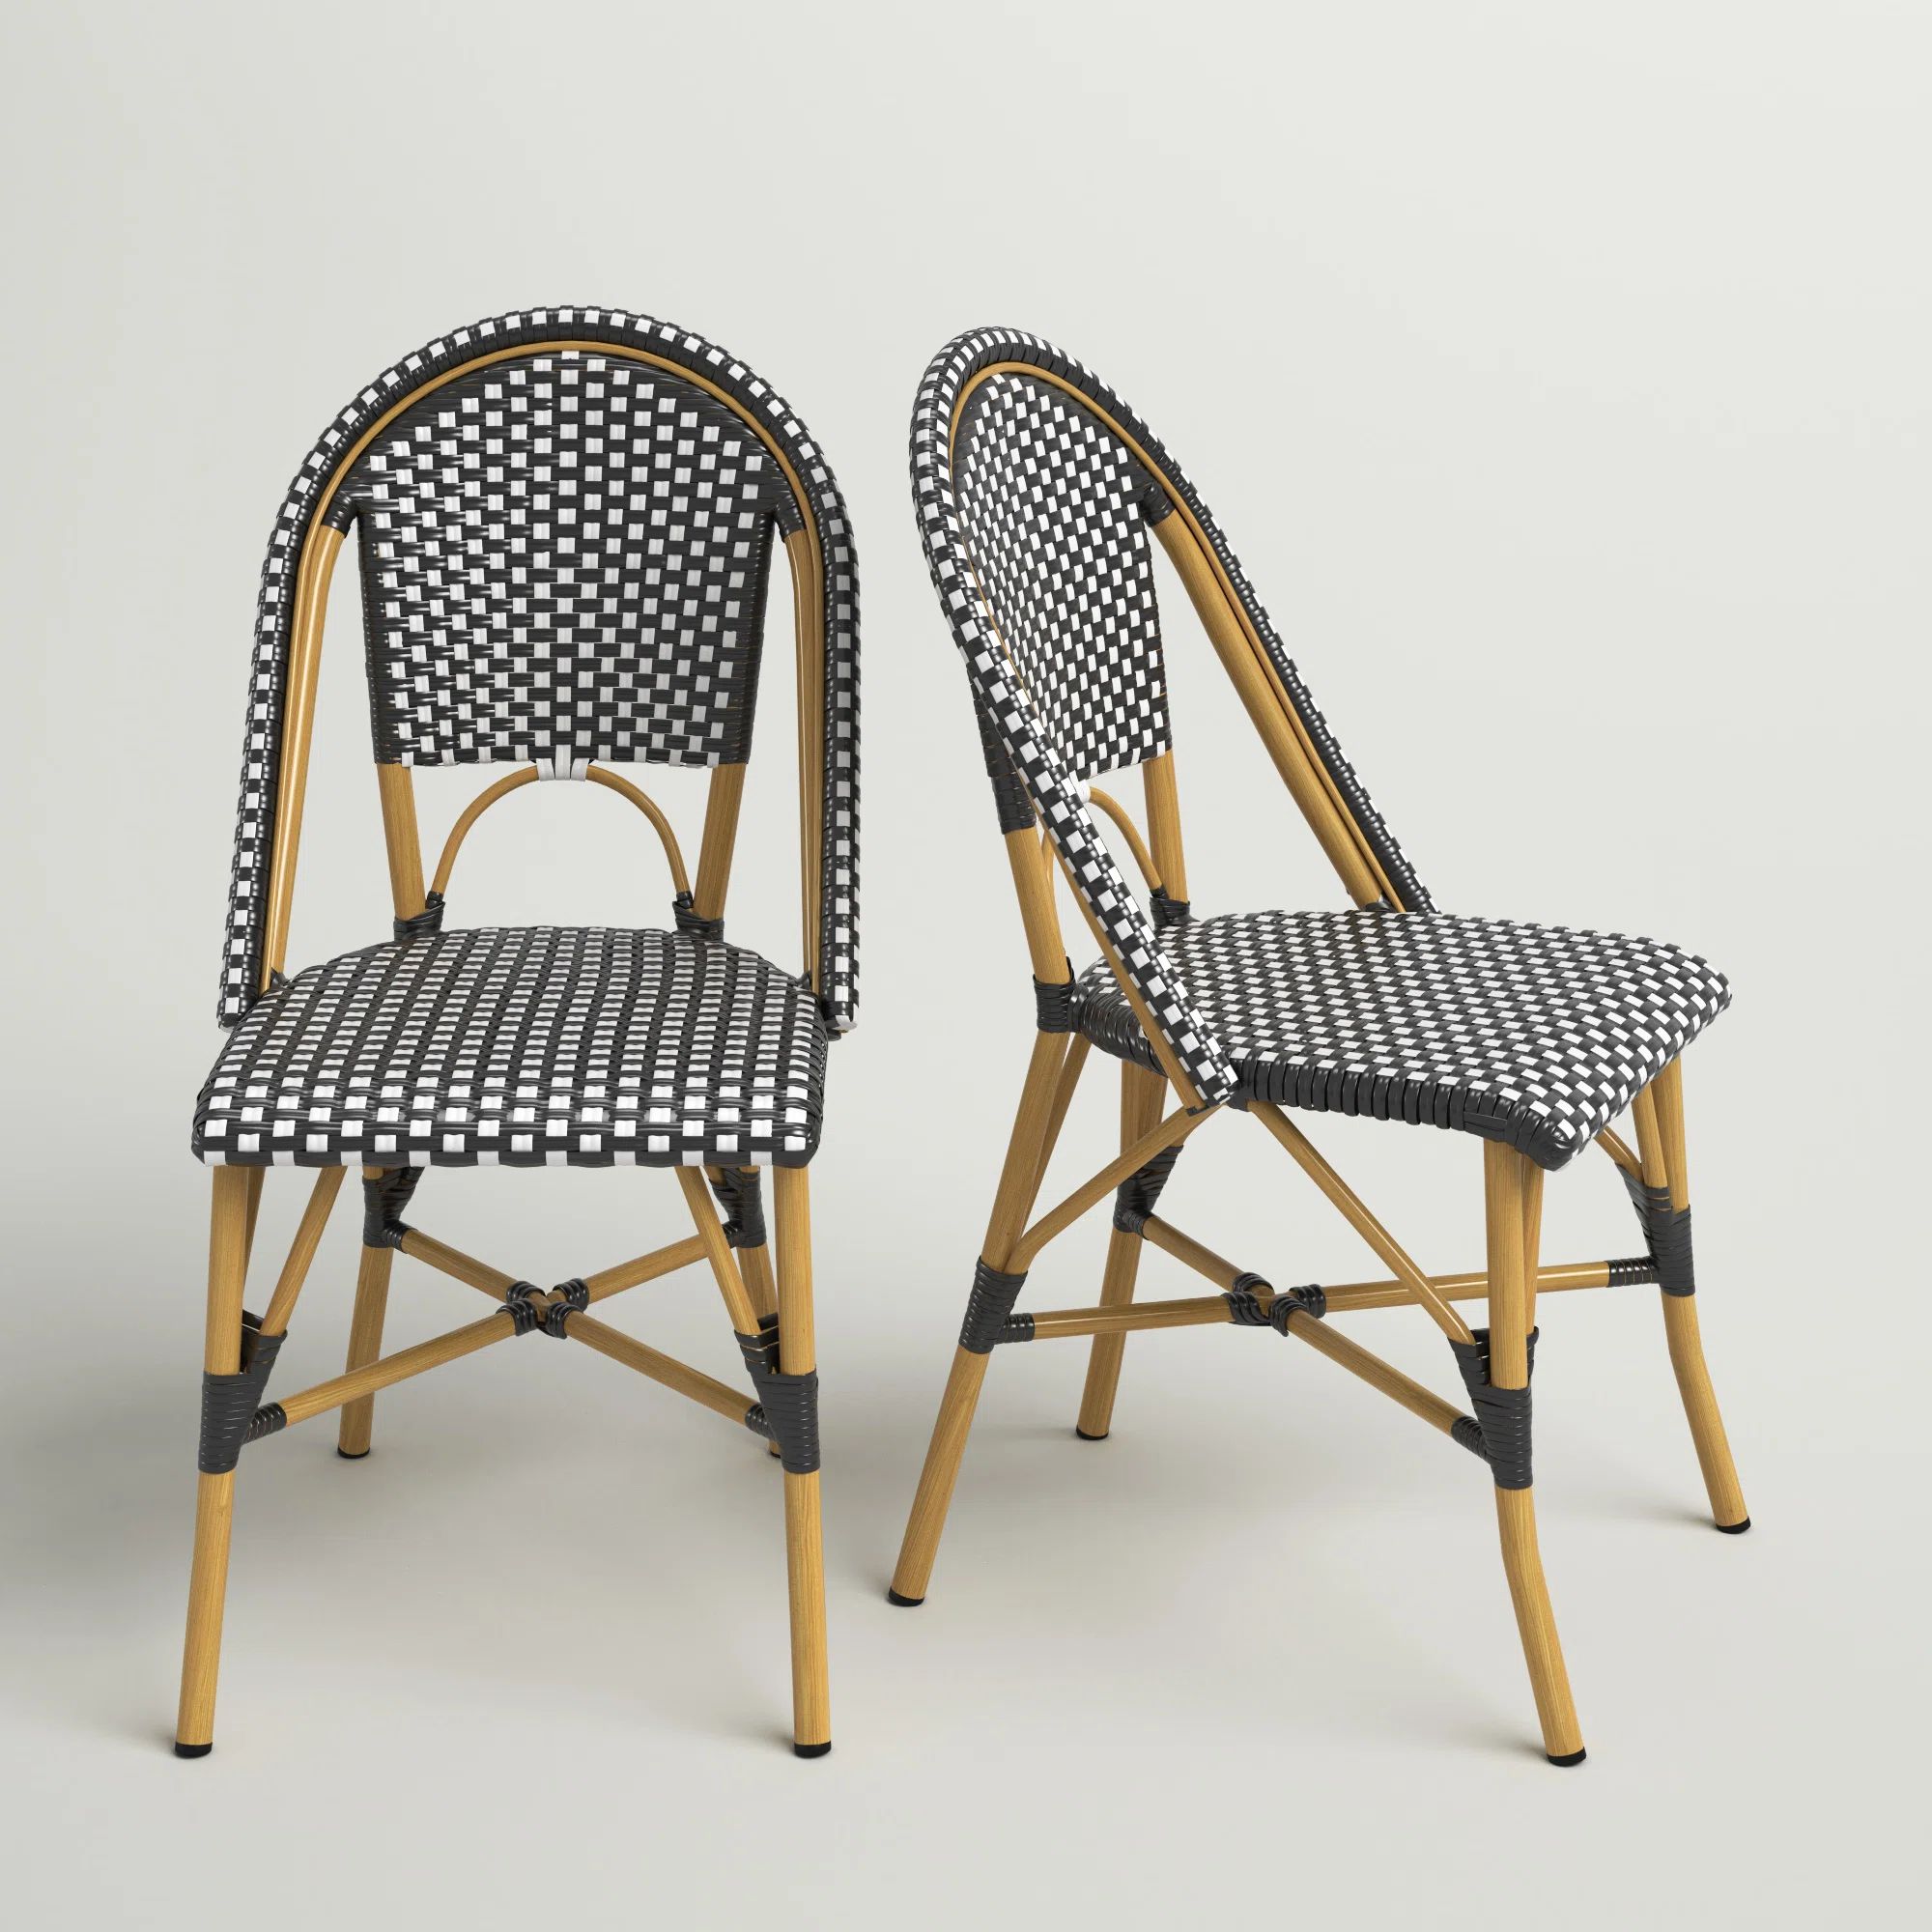 Underhill Wicker Outdoor Dining Side Chair with Cushion (Set of 2) | Wayfair North America